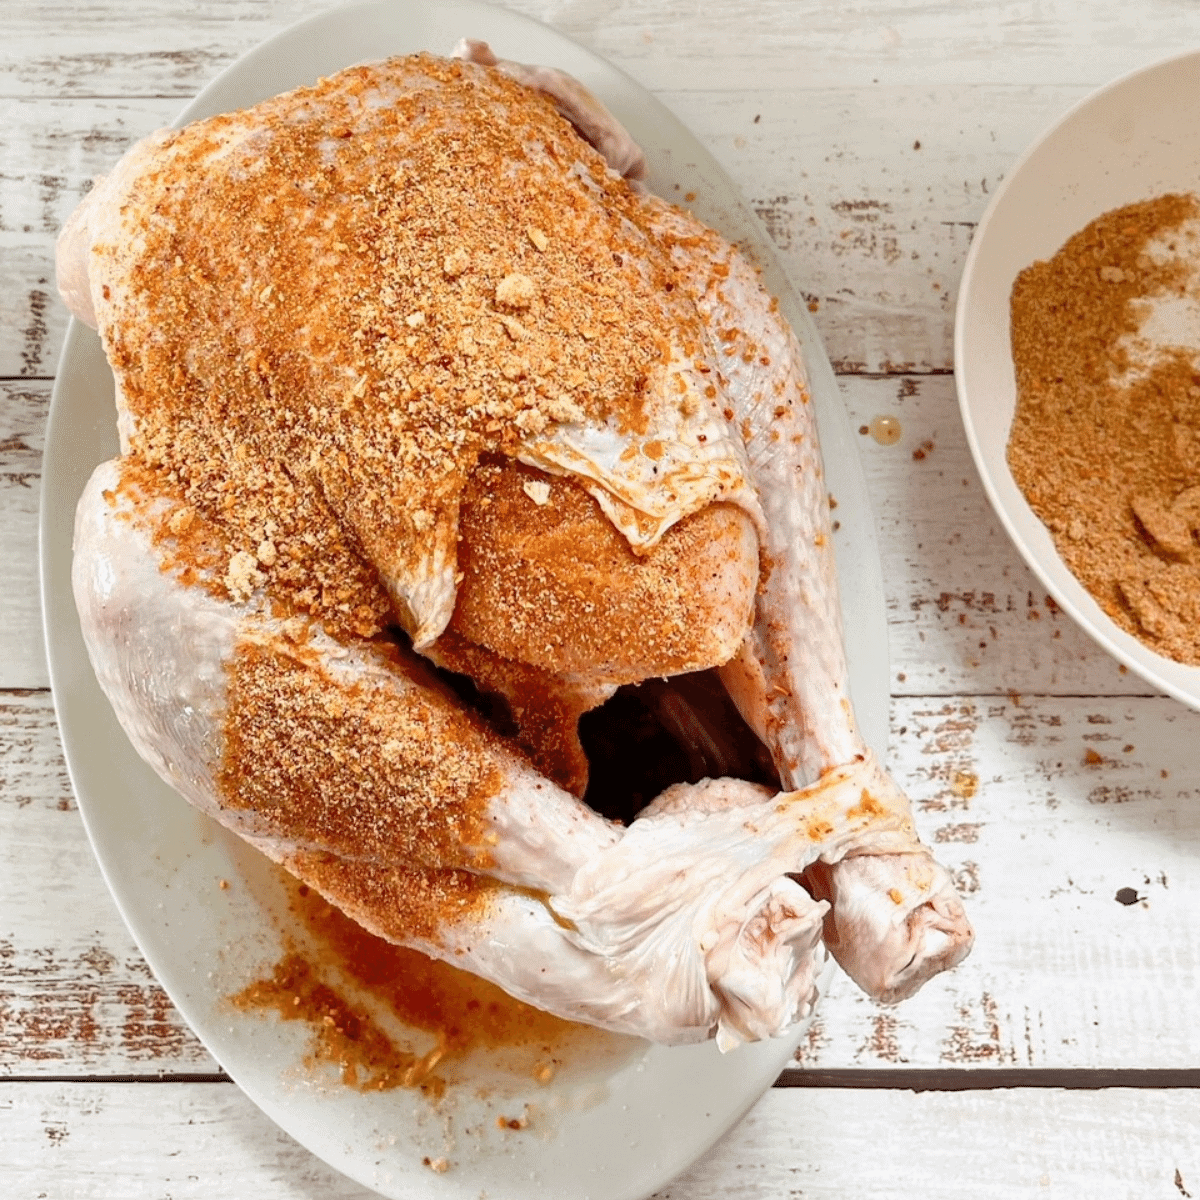 Rub olive oil or butter on entire turkey and cover with dry spice rub with turkey on a platter